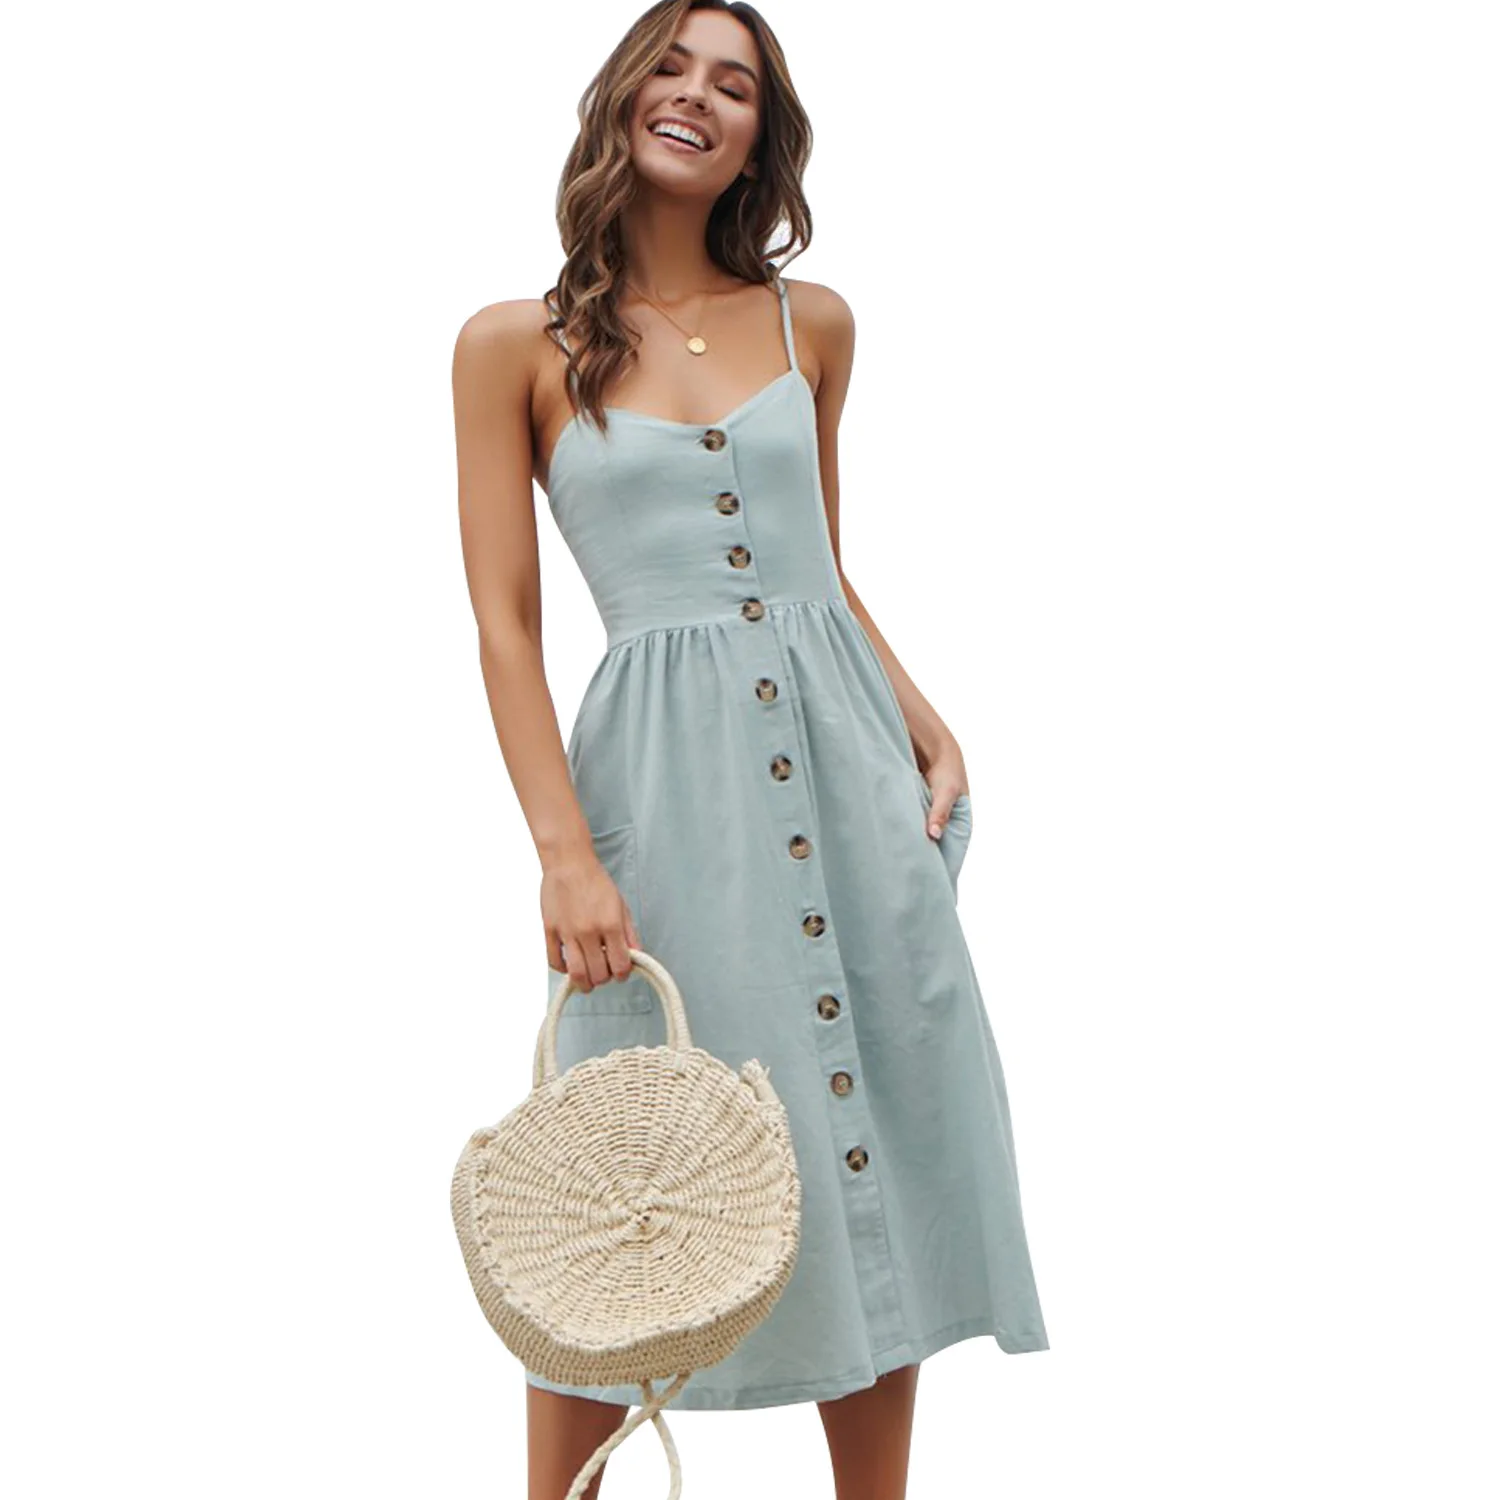 

Fast Delivery Summer Dresses Women Ladies Fashion Dresses For Women with botton, Photo shown